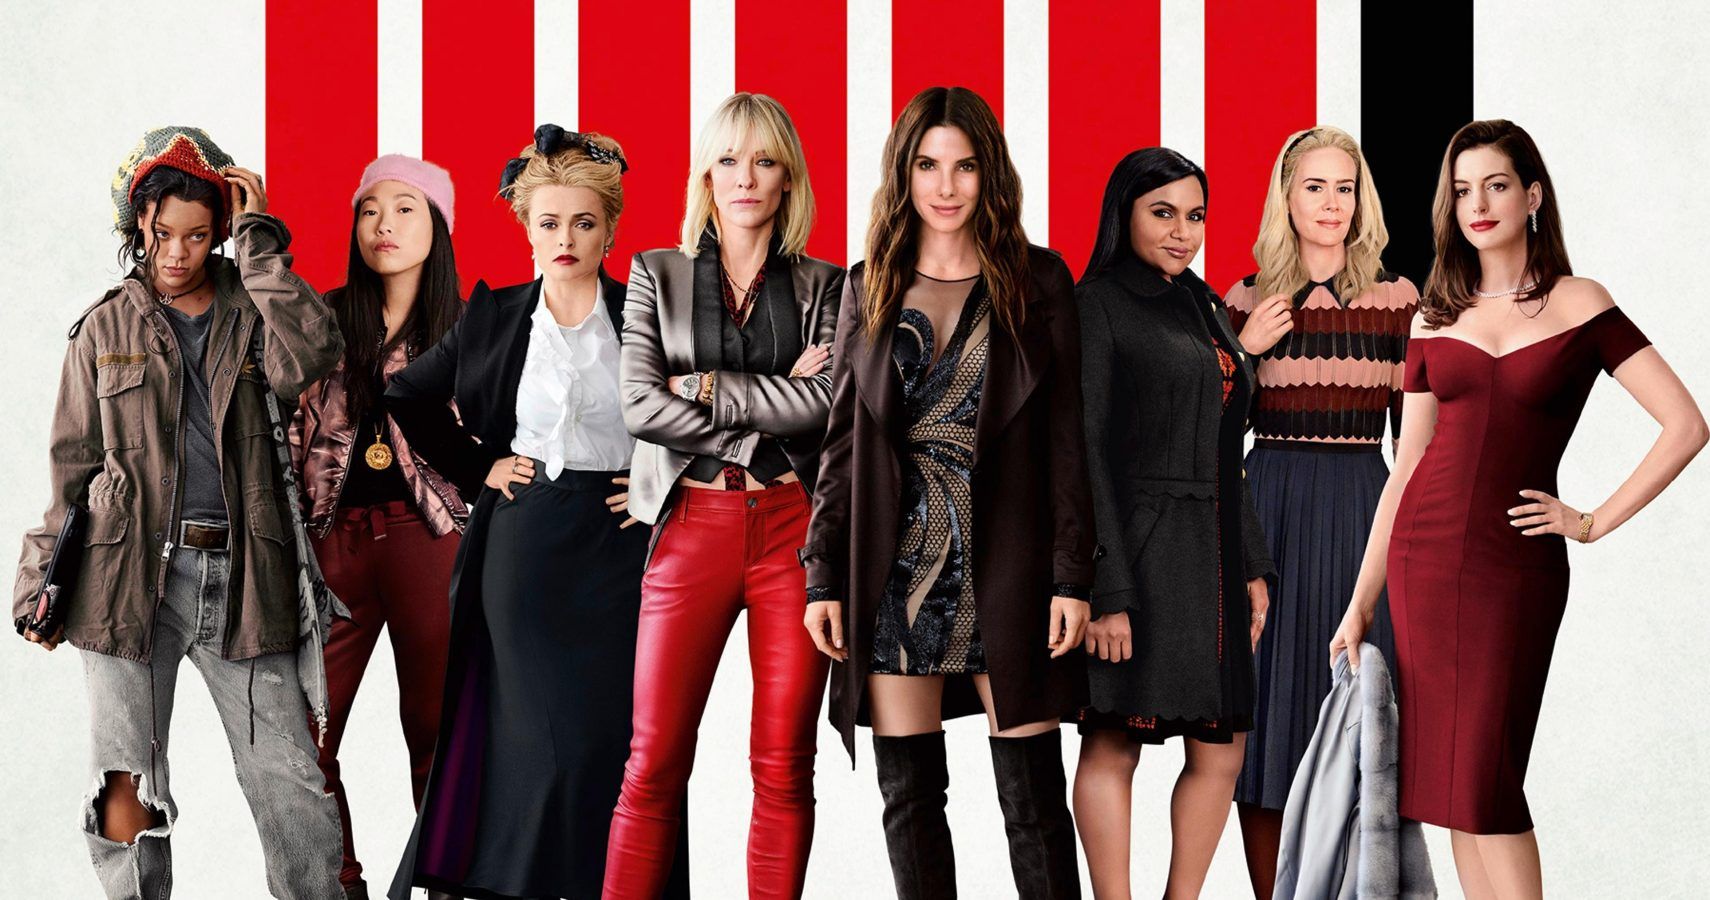 15 Movies To Watch If You Liked Oceans 8